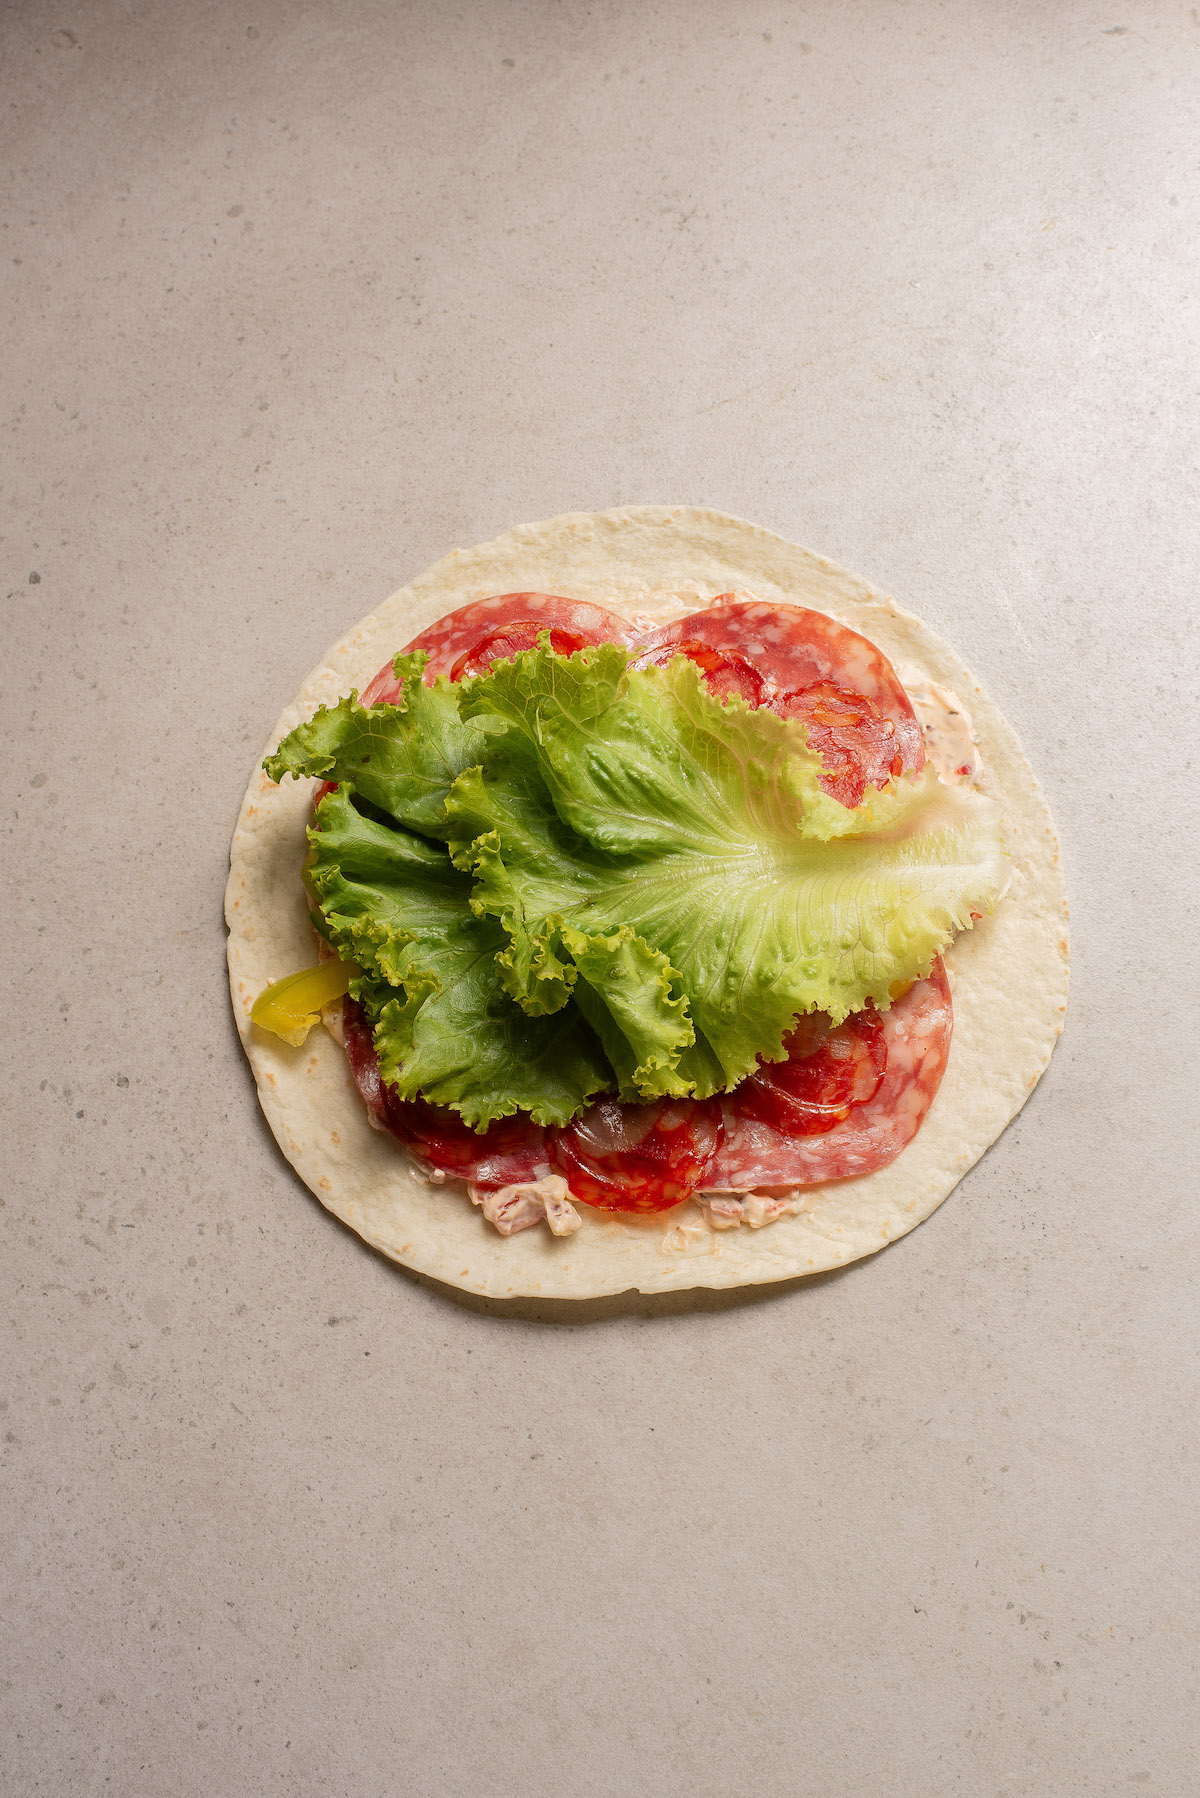 one flat tortilla with the sandwich ingredients on top